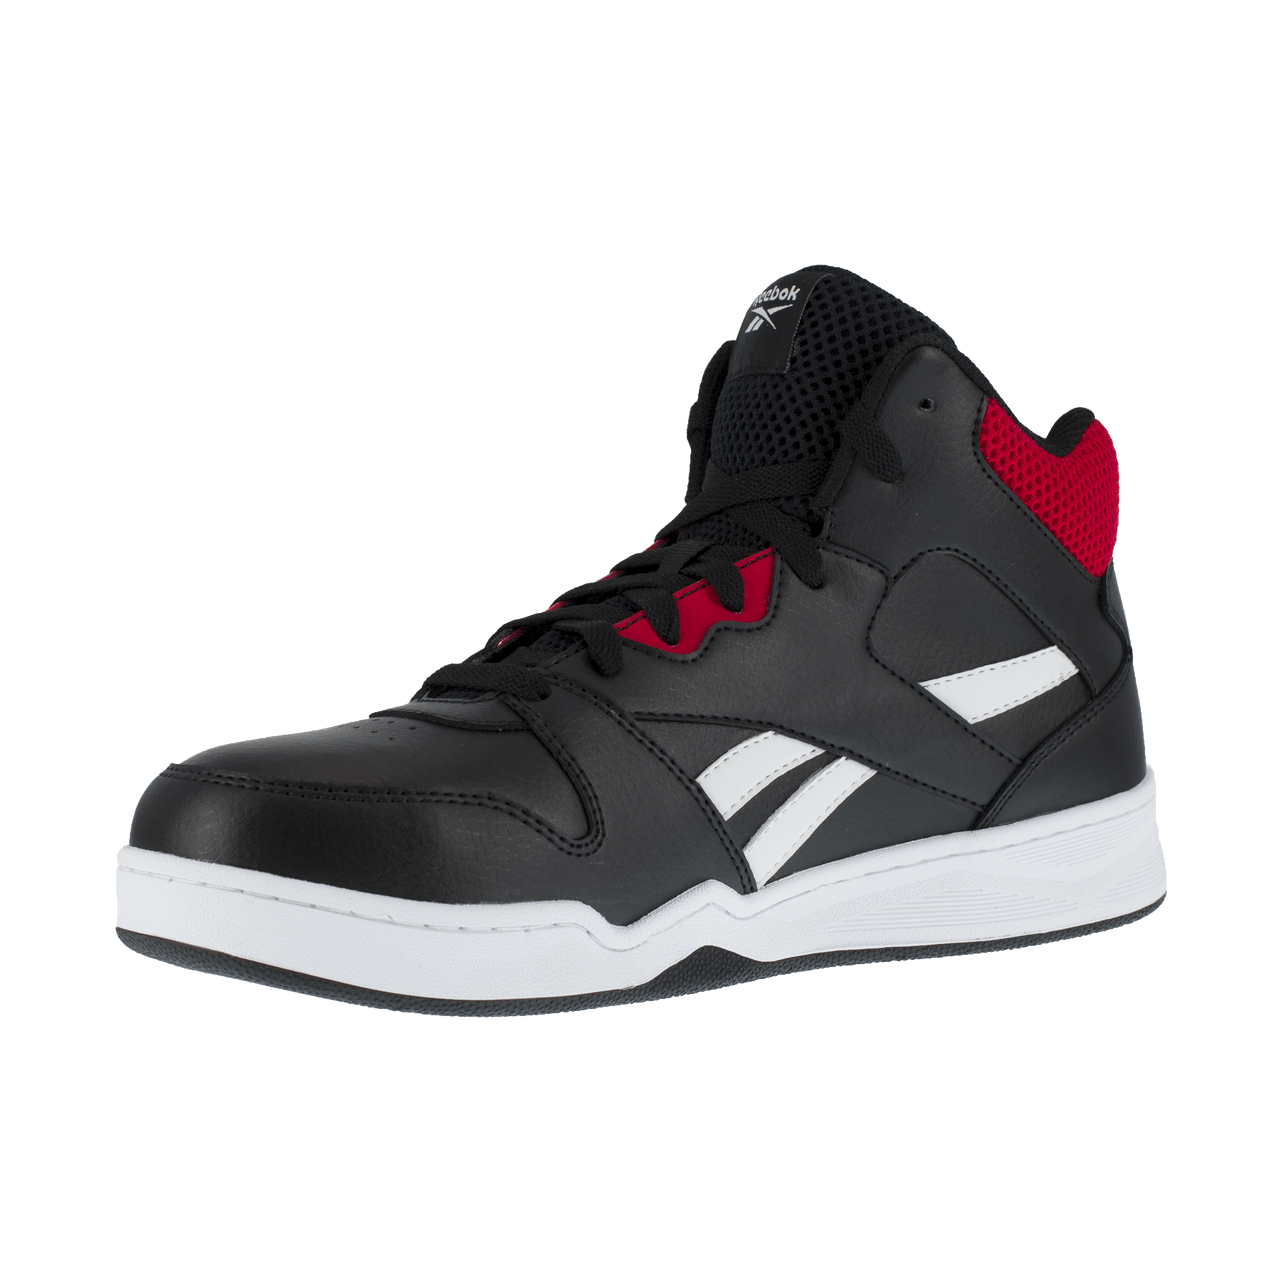 Reebok Leather Athletic Safety Shoes